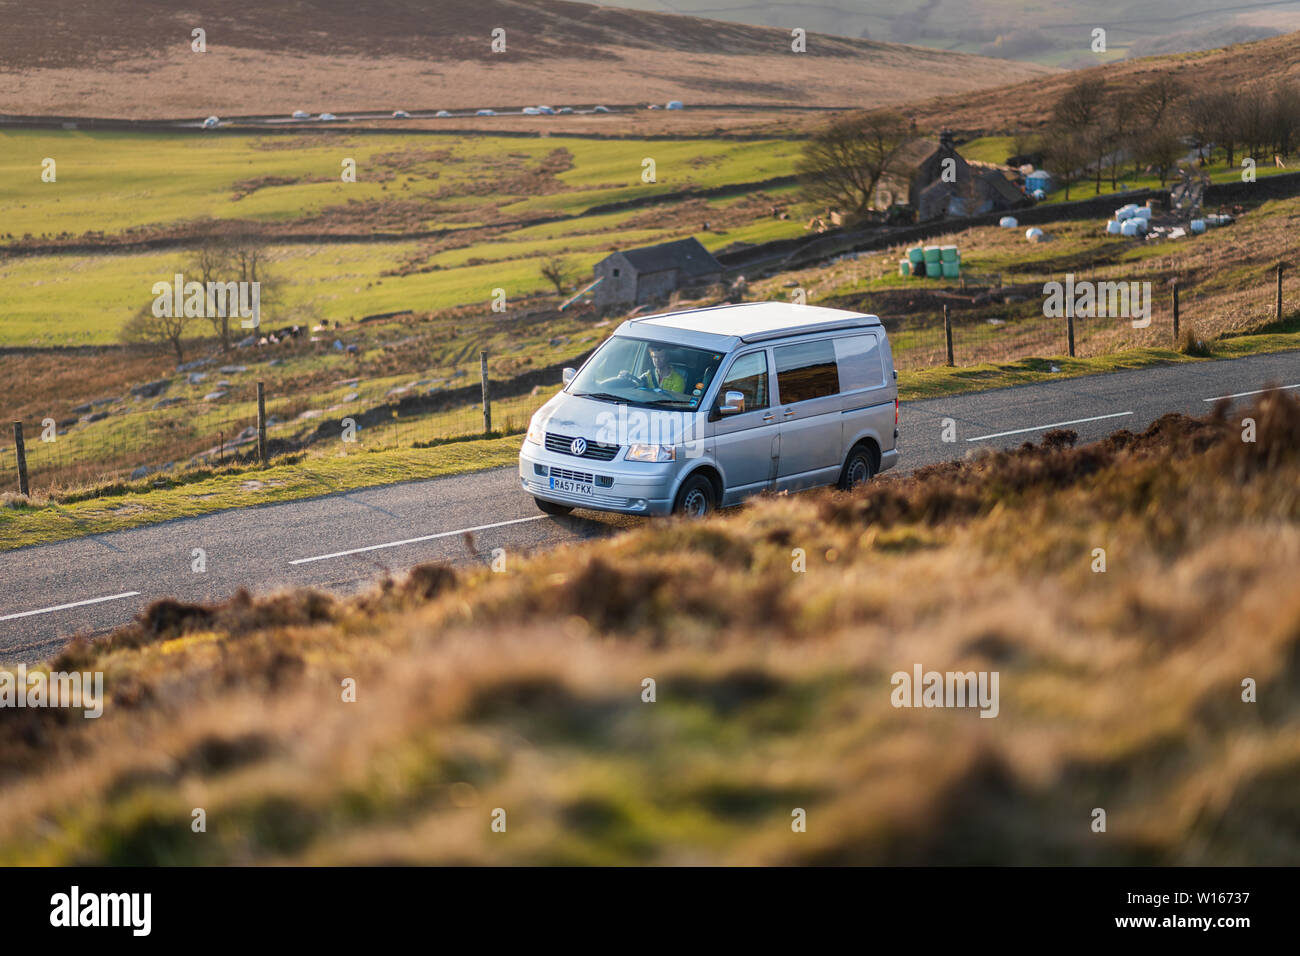 DERBYSHIRE, UK - 31ST MARCH 2019: A silver van drives through the Peak District during a low sunset Stock Photo